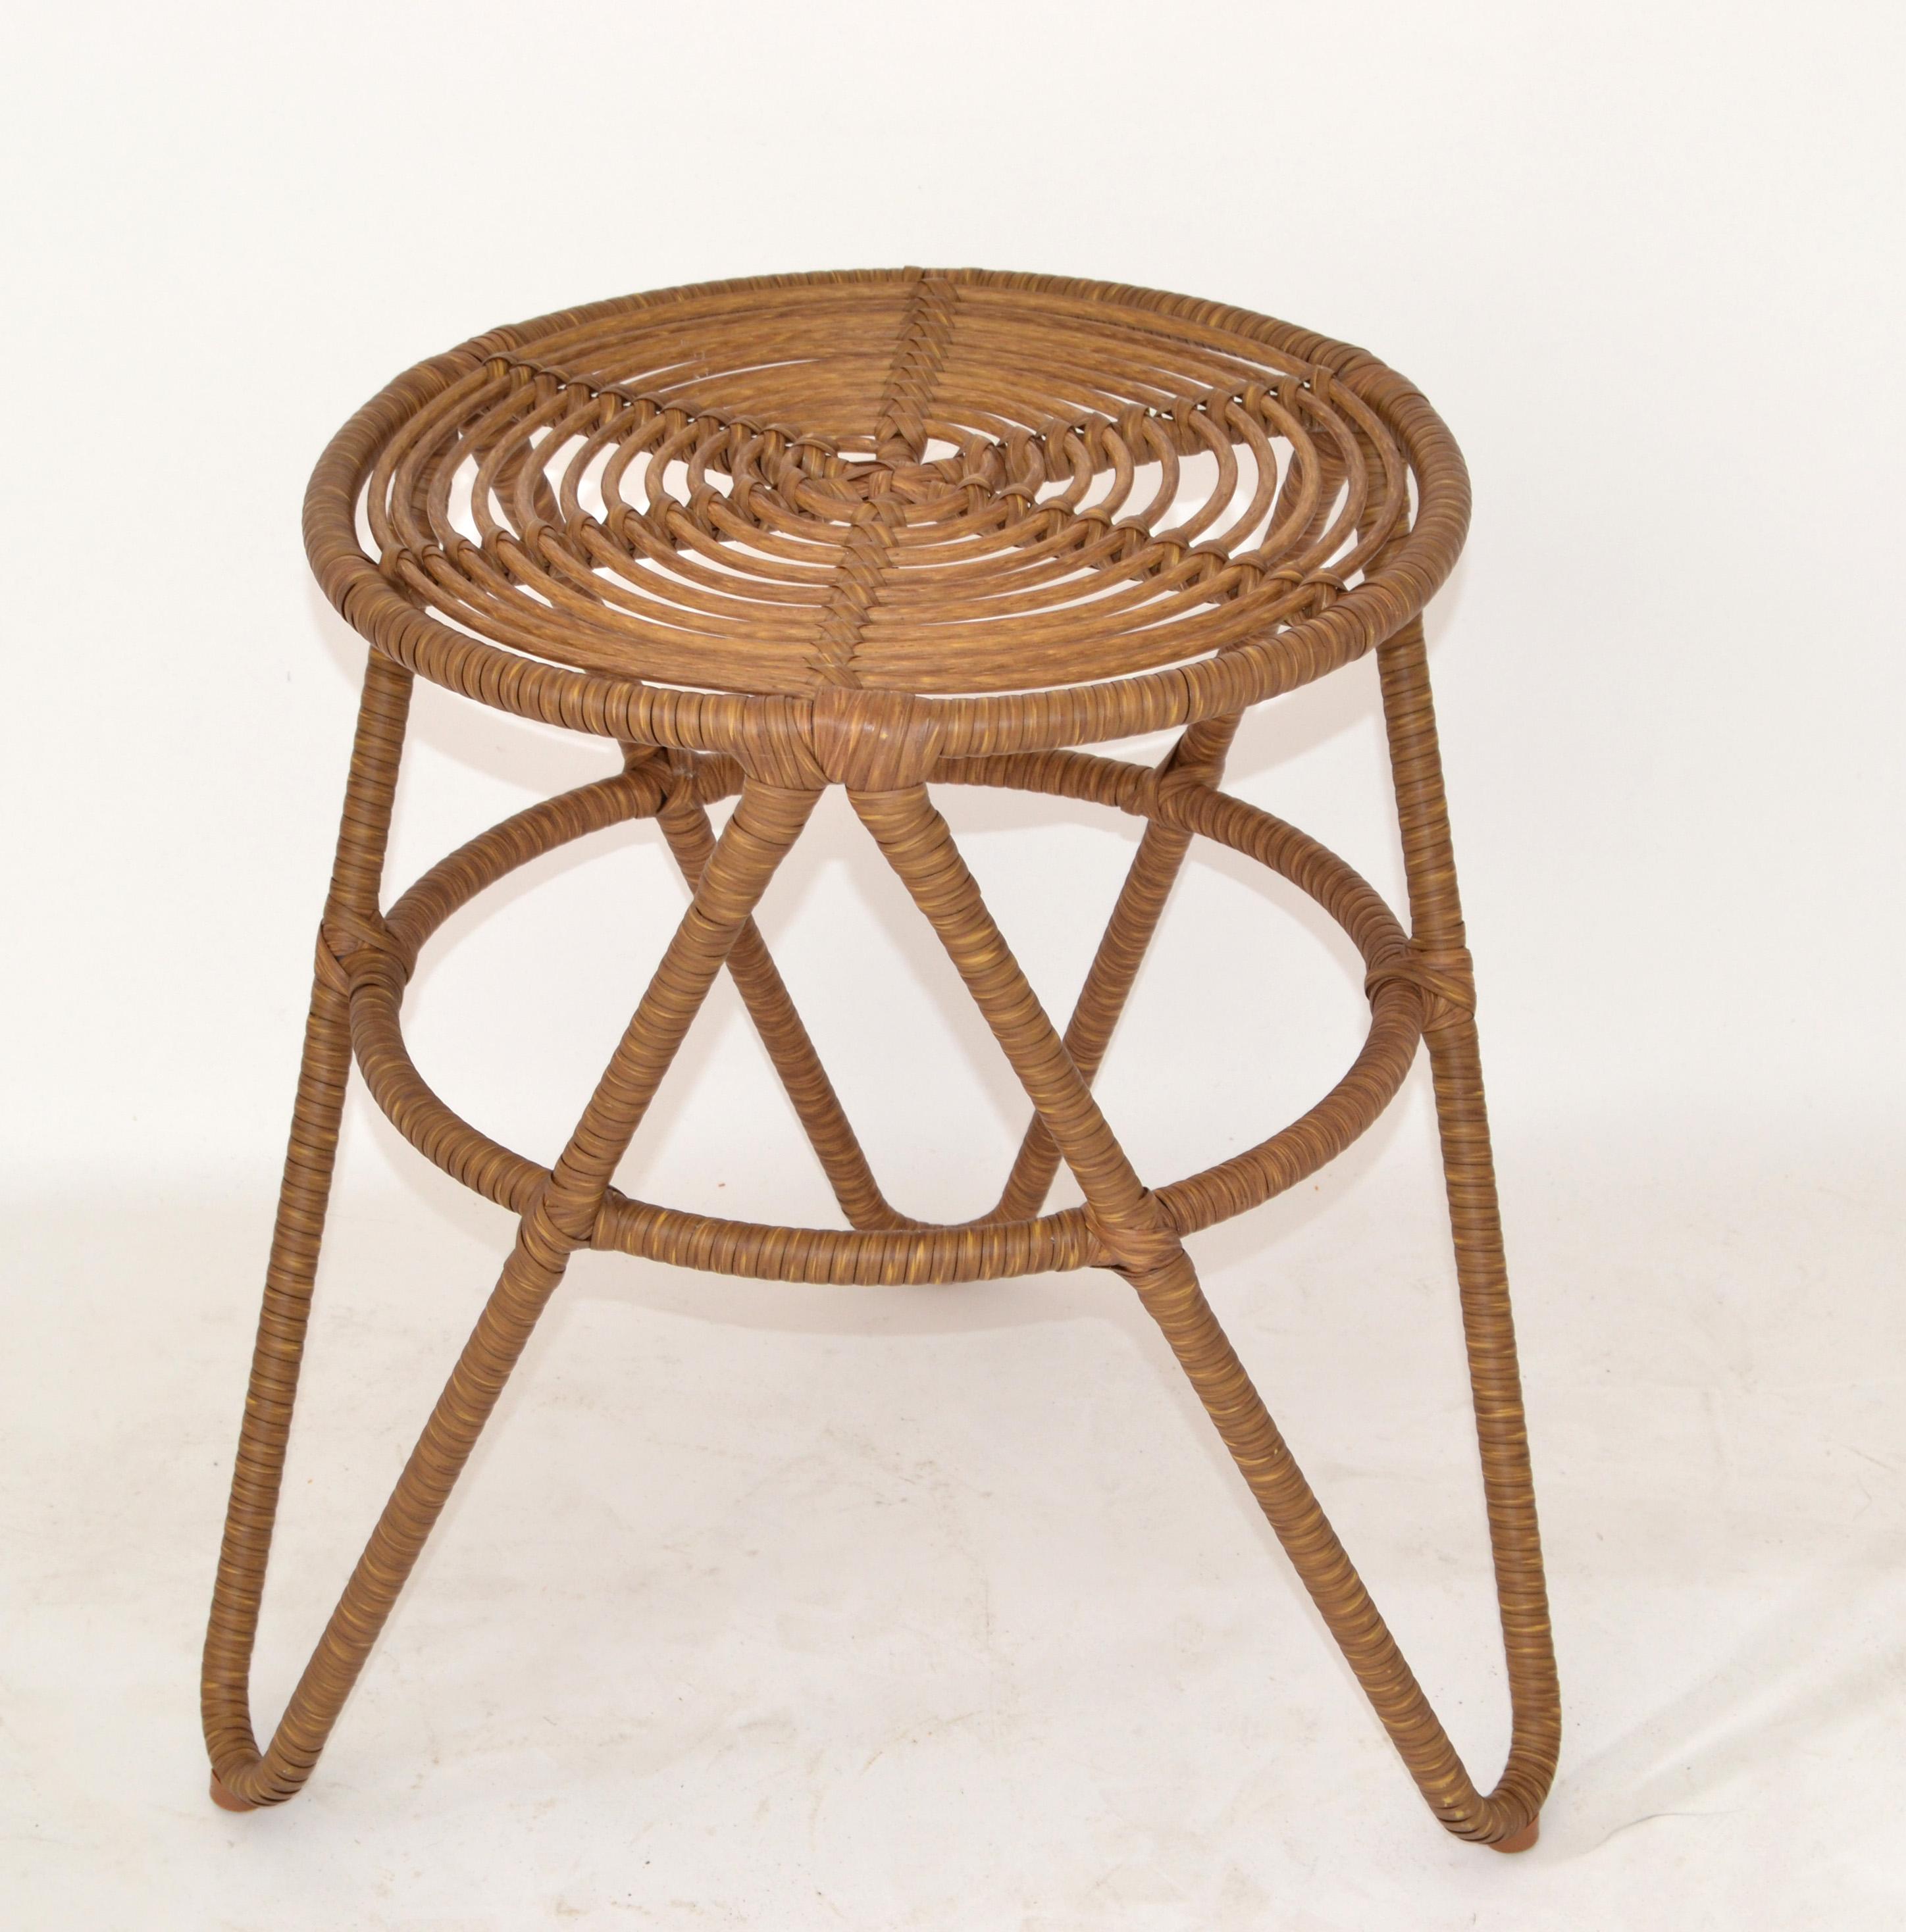 Organic Modern Taupe 3-legged stool in hand-woven Cane bindings over wrought Iron and Foot glides in plastic.
Asian Style made in the late 20th Century.
Marked at the Base, Made in Vietnam.
In very good condition and ready for a new Home